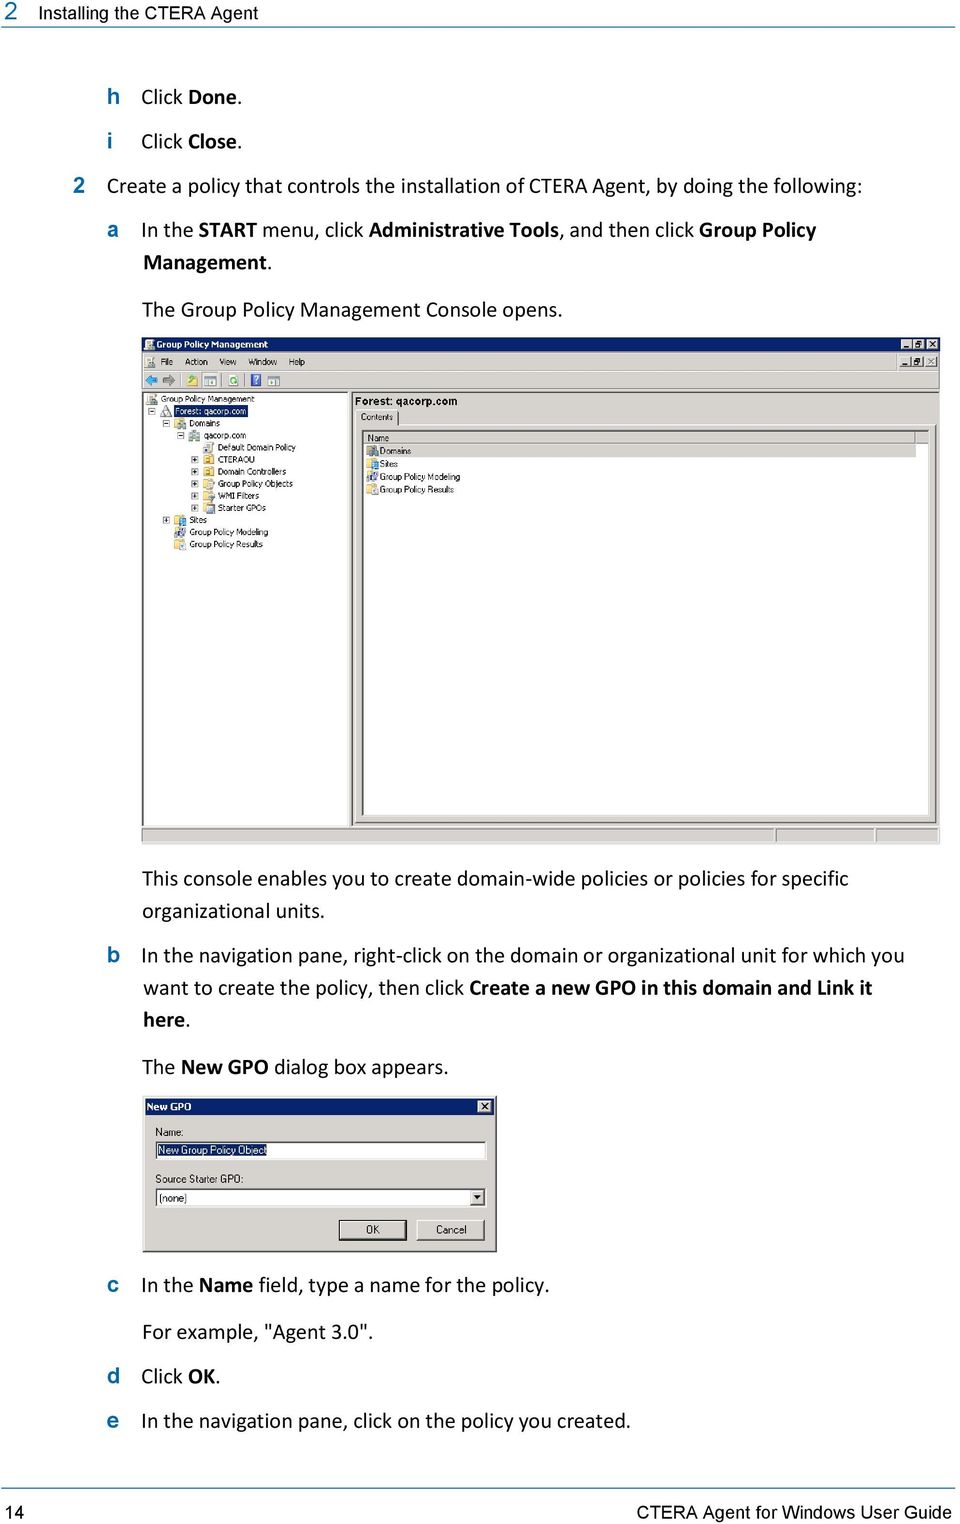 The Group Policy Management Console opens. This console enables you to create domain-wide policies or policies for specific organizational units.